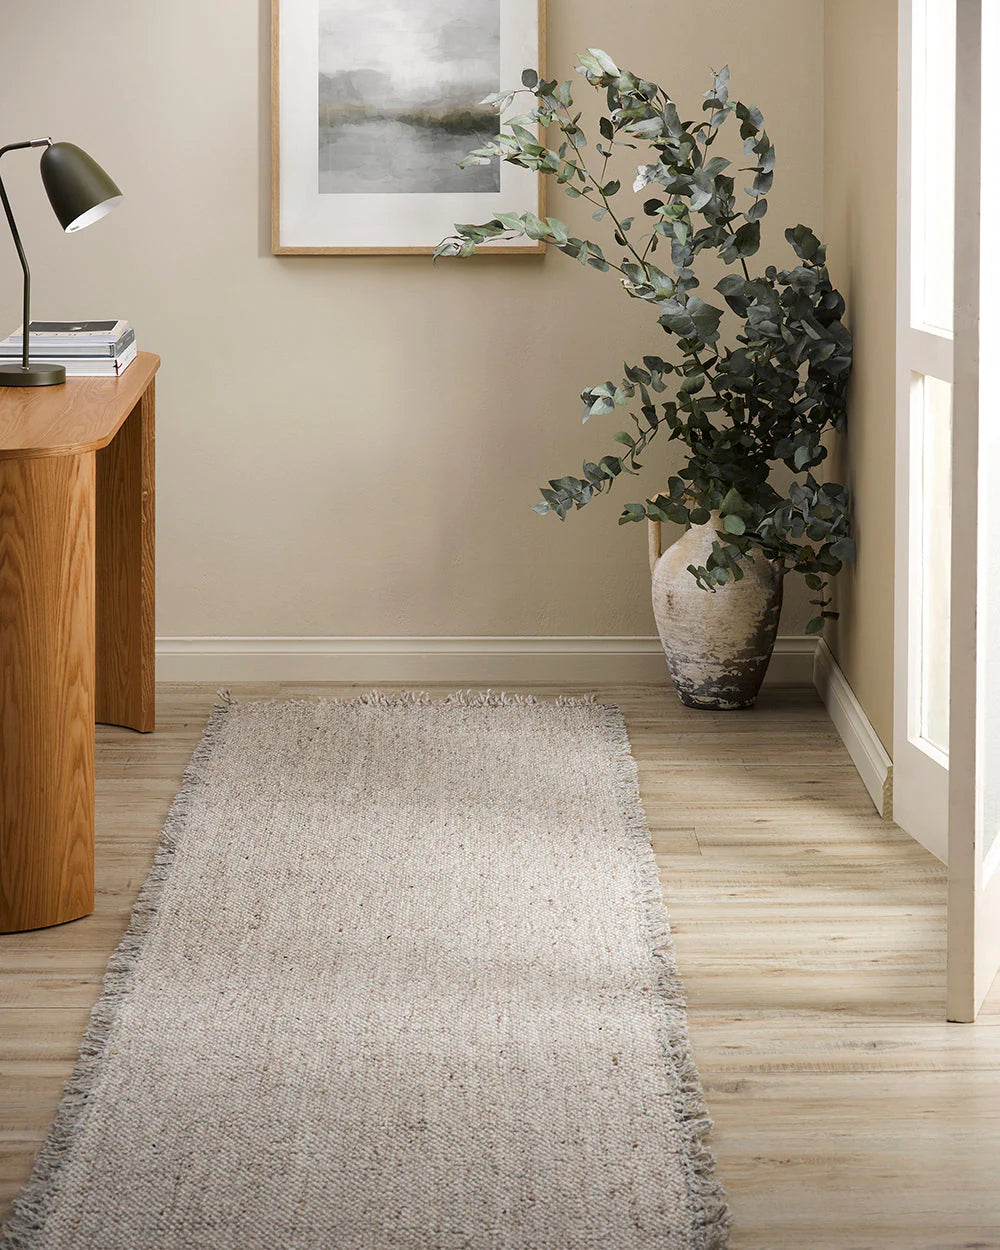 Ulster Taupe Natural Floor Runner from Baya Furtex Stockist Make Your House A Home, Furniture Store Bendigo. Free Australia Wide Delivery. Mulberi Rugs.